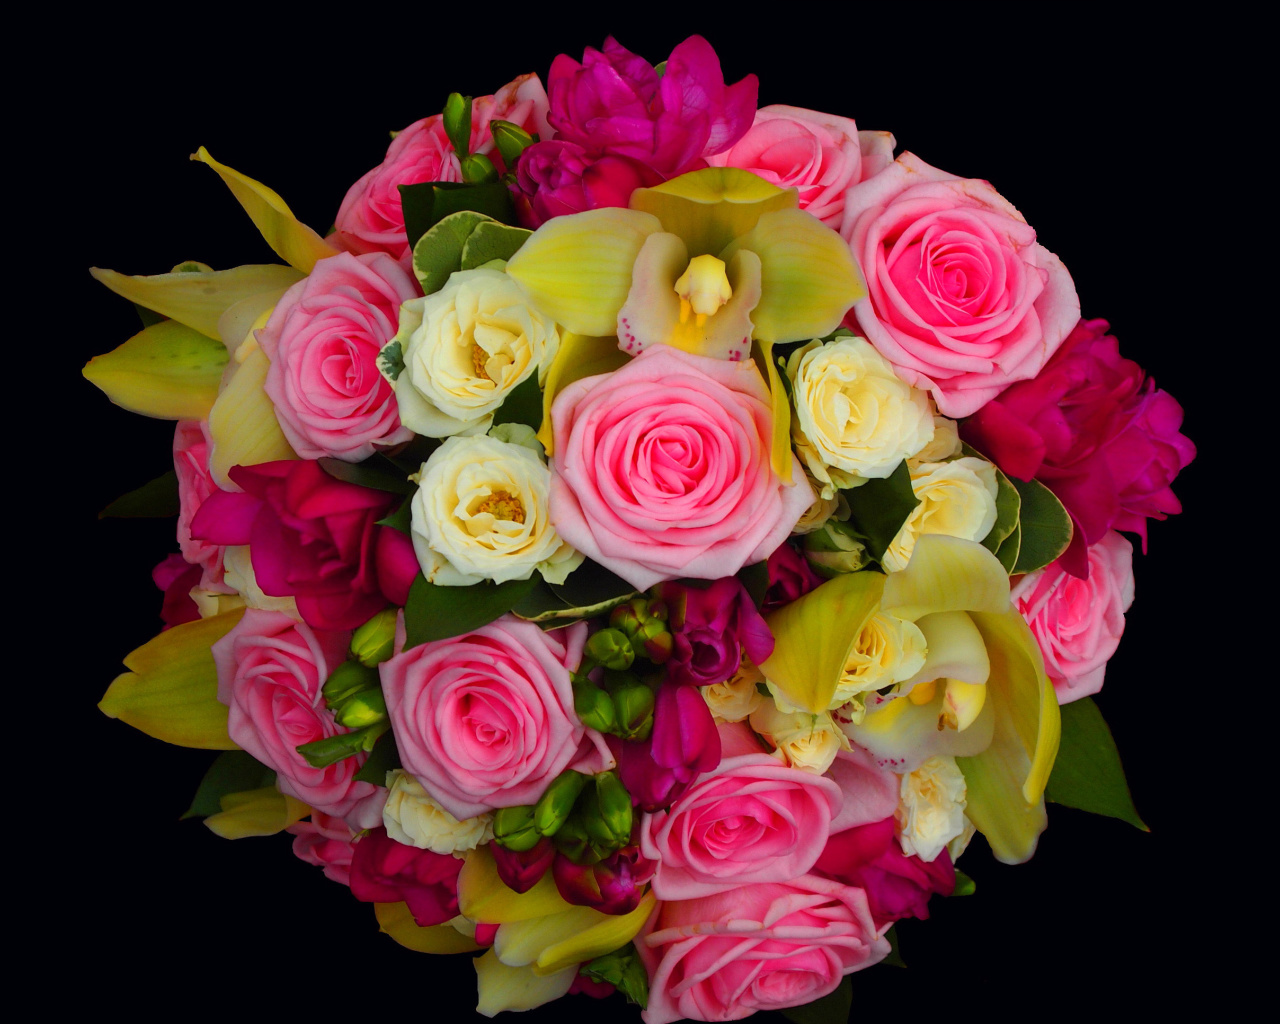 Bouquet of roses and yellow orchid, floristry wallpaper 1280x1024